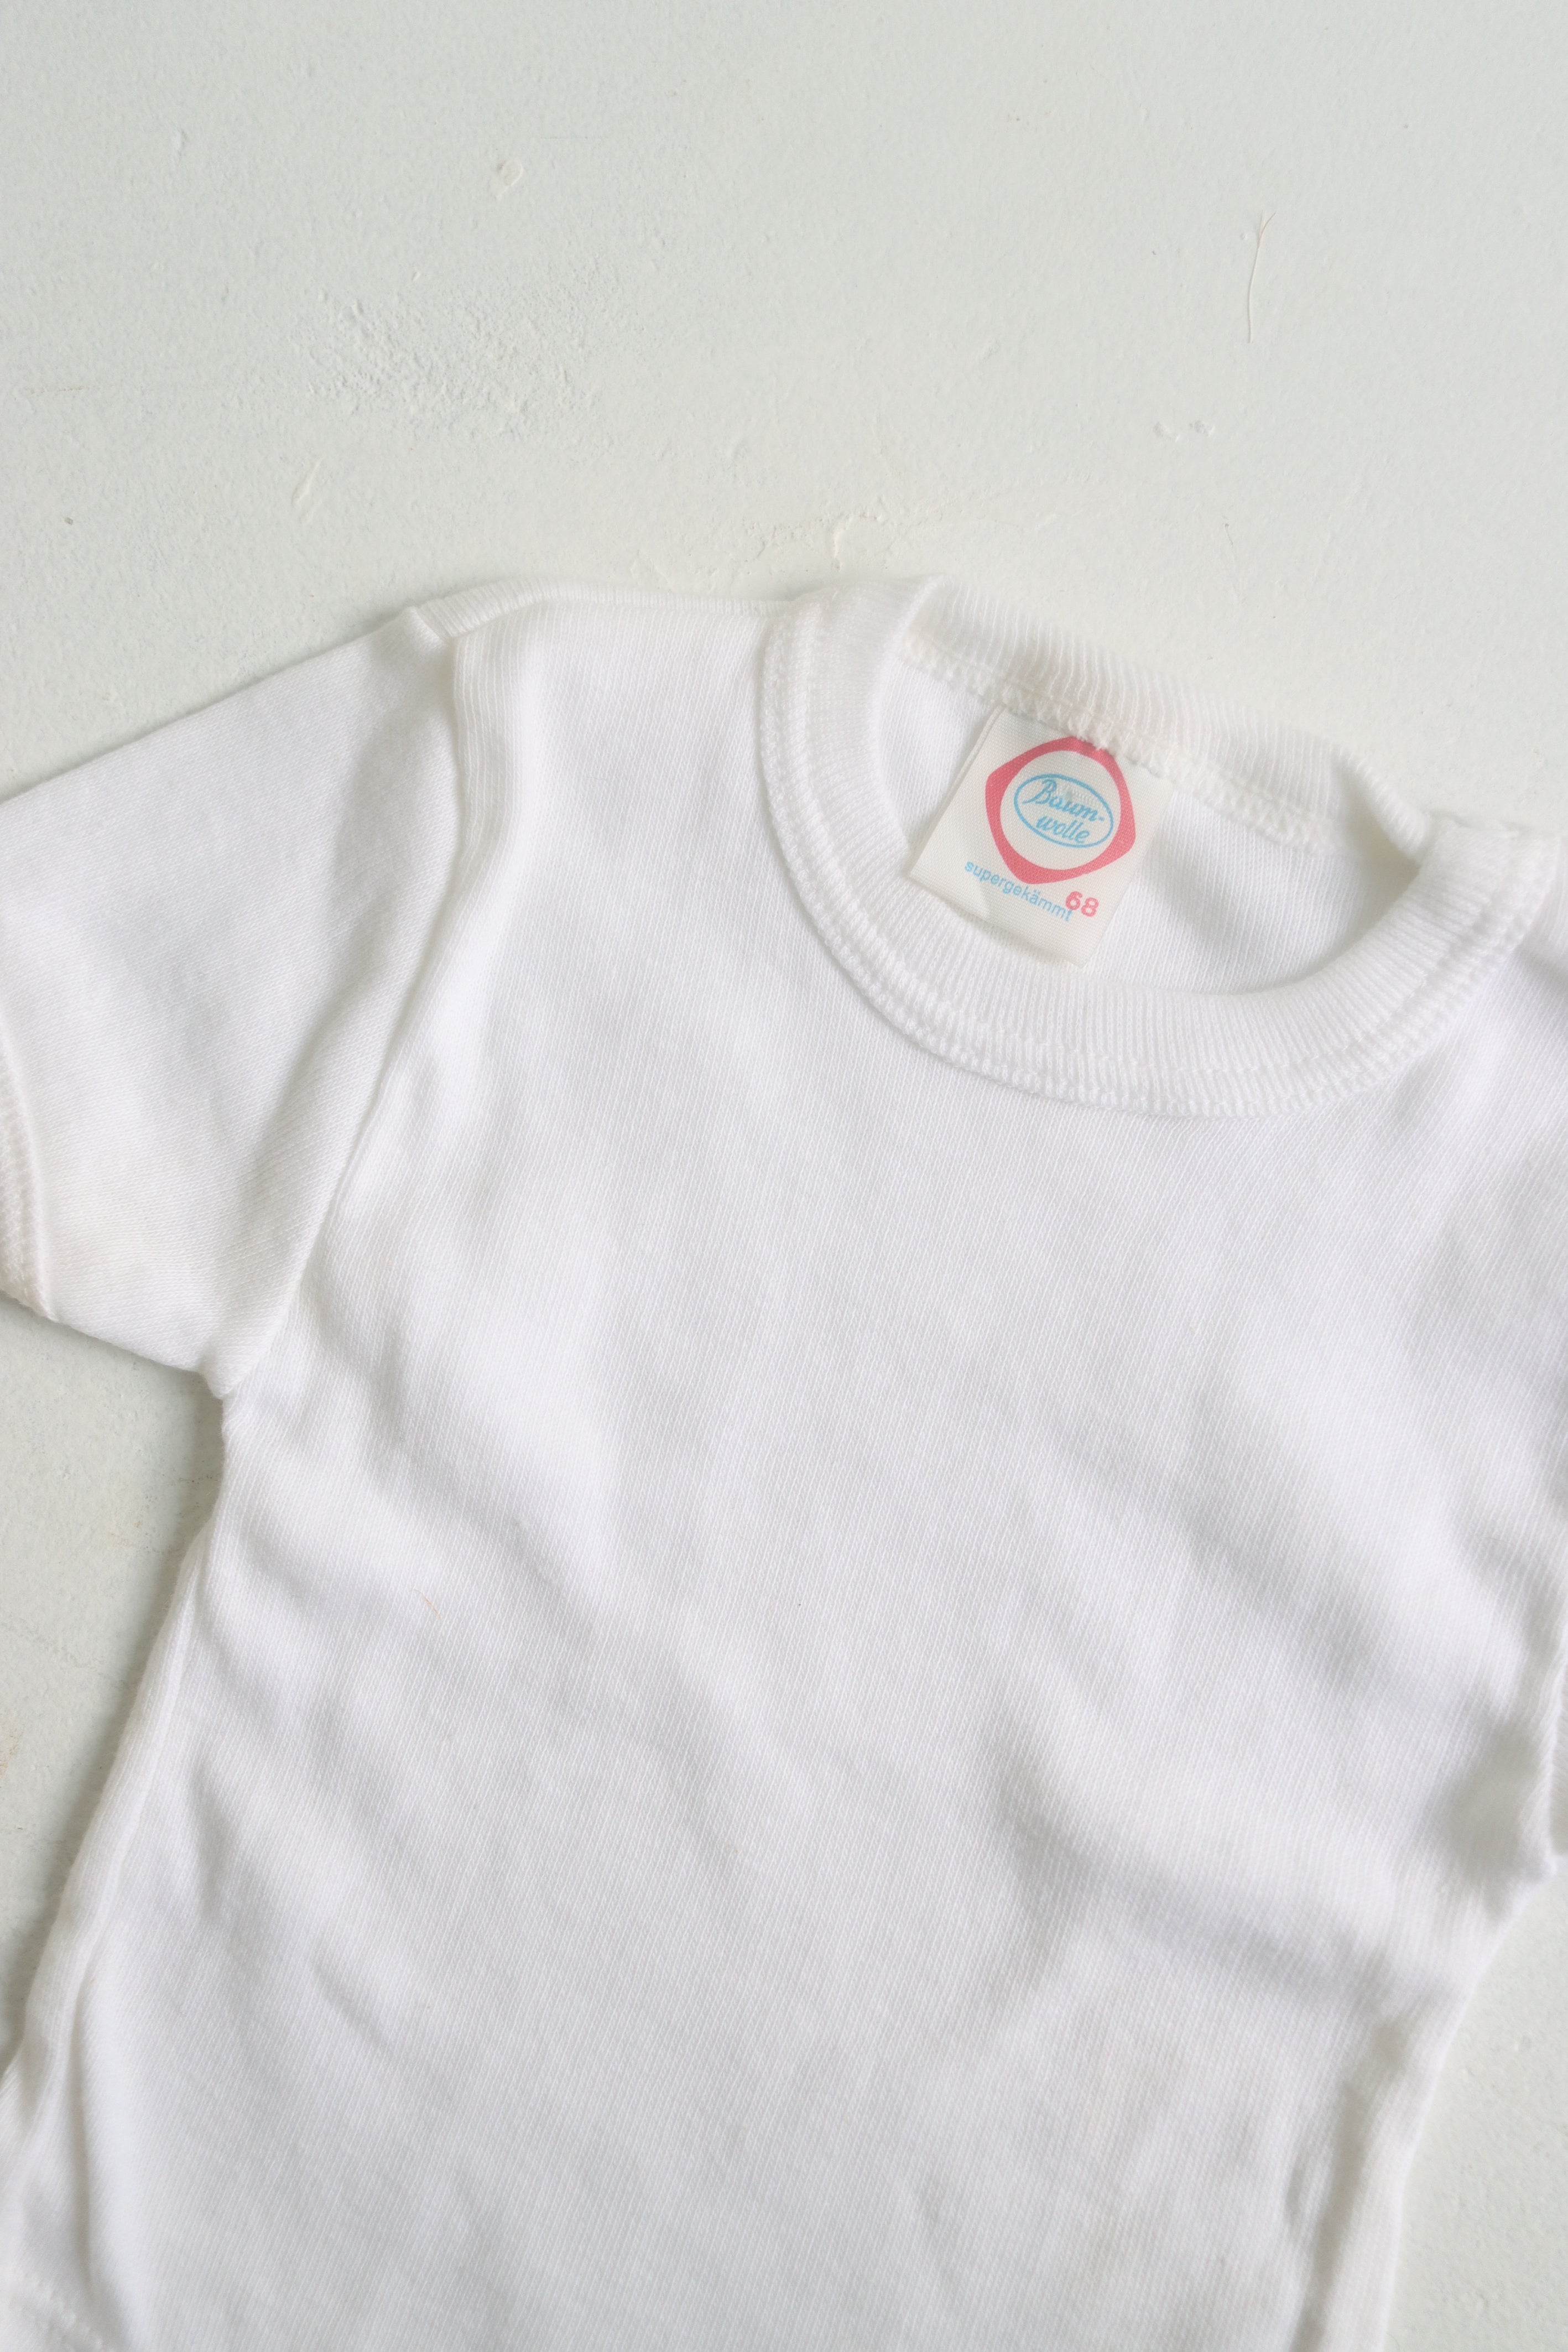 Baby's First Vintage Tee  - Size newborn 0-3 months - made in Germany